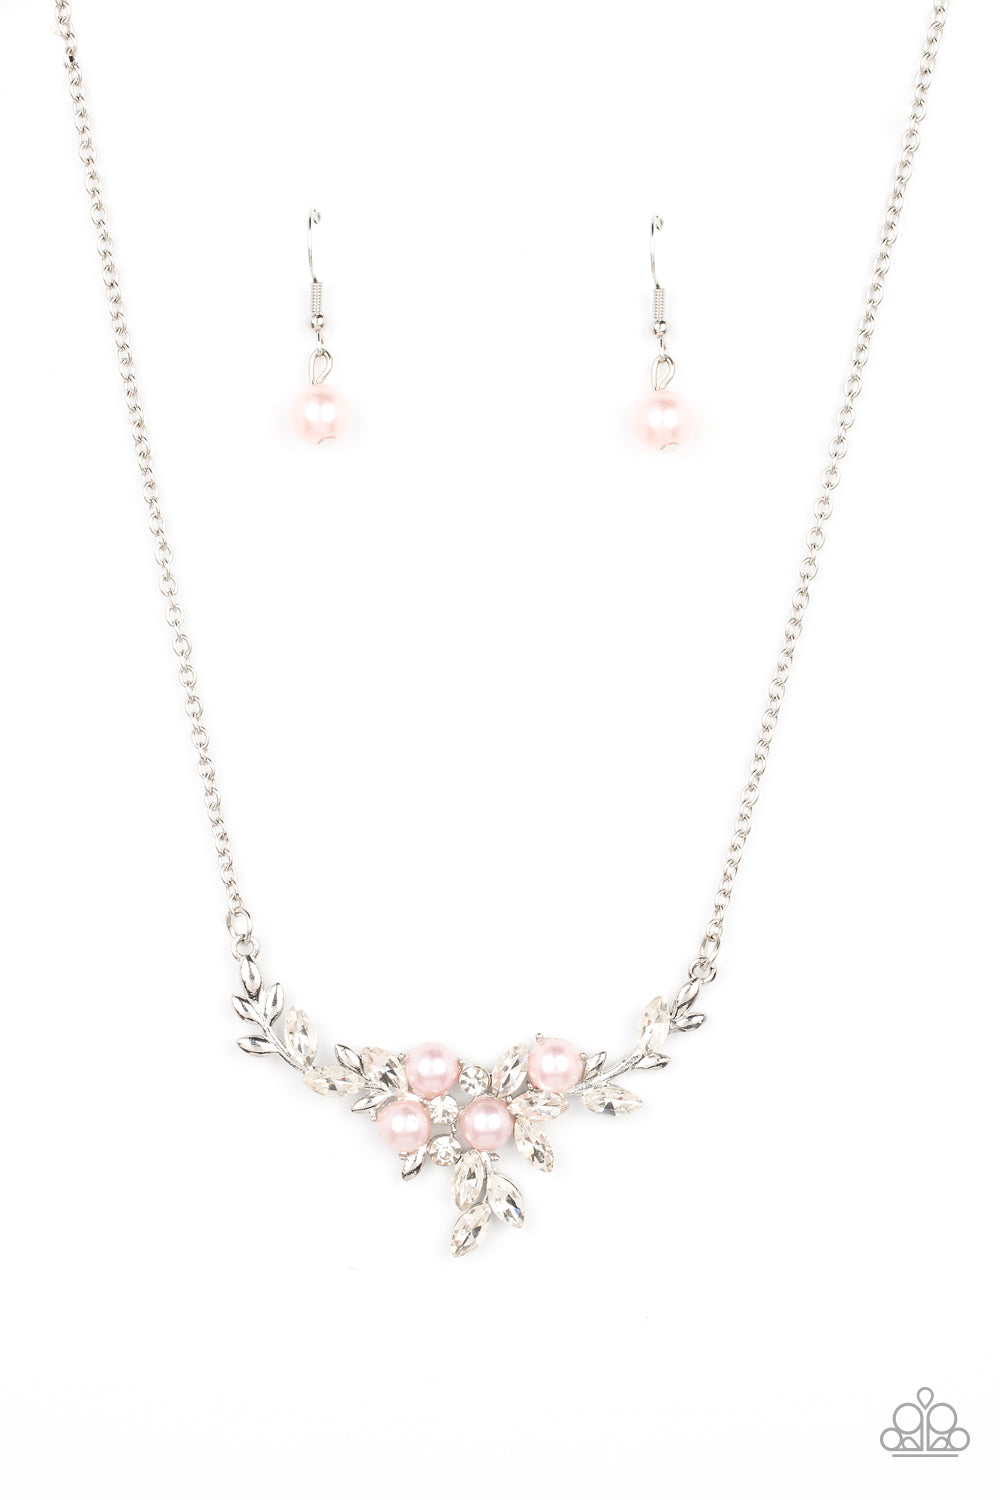 Because Im The Bride - Pink Pearl White Rhinestone Short Silver Necklace